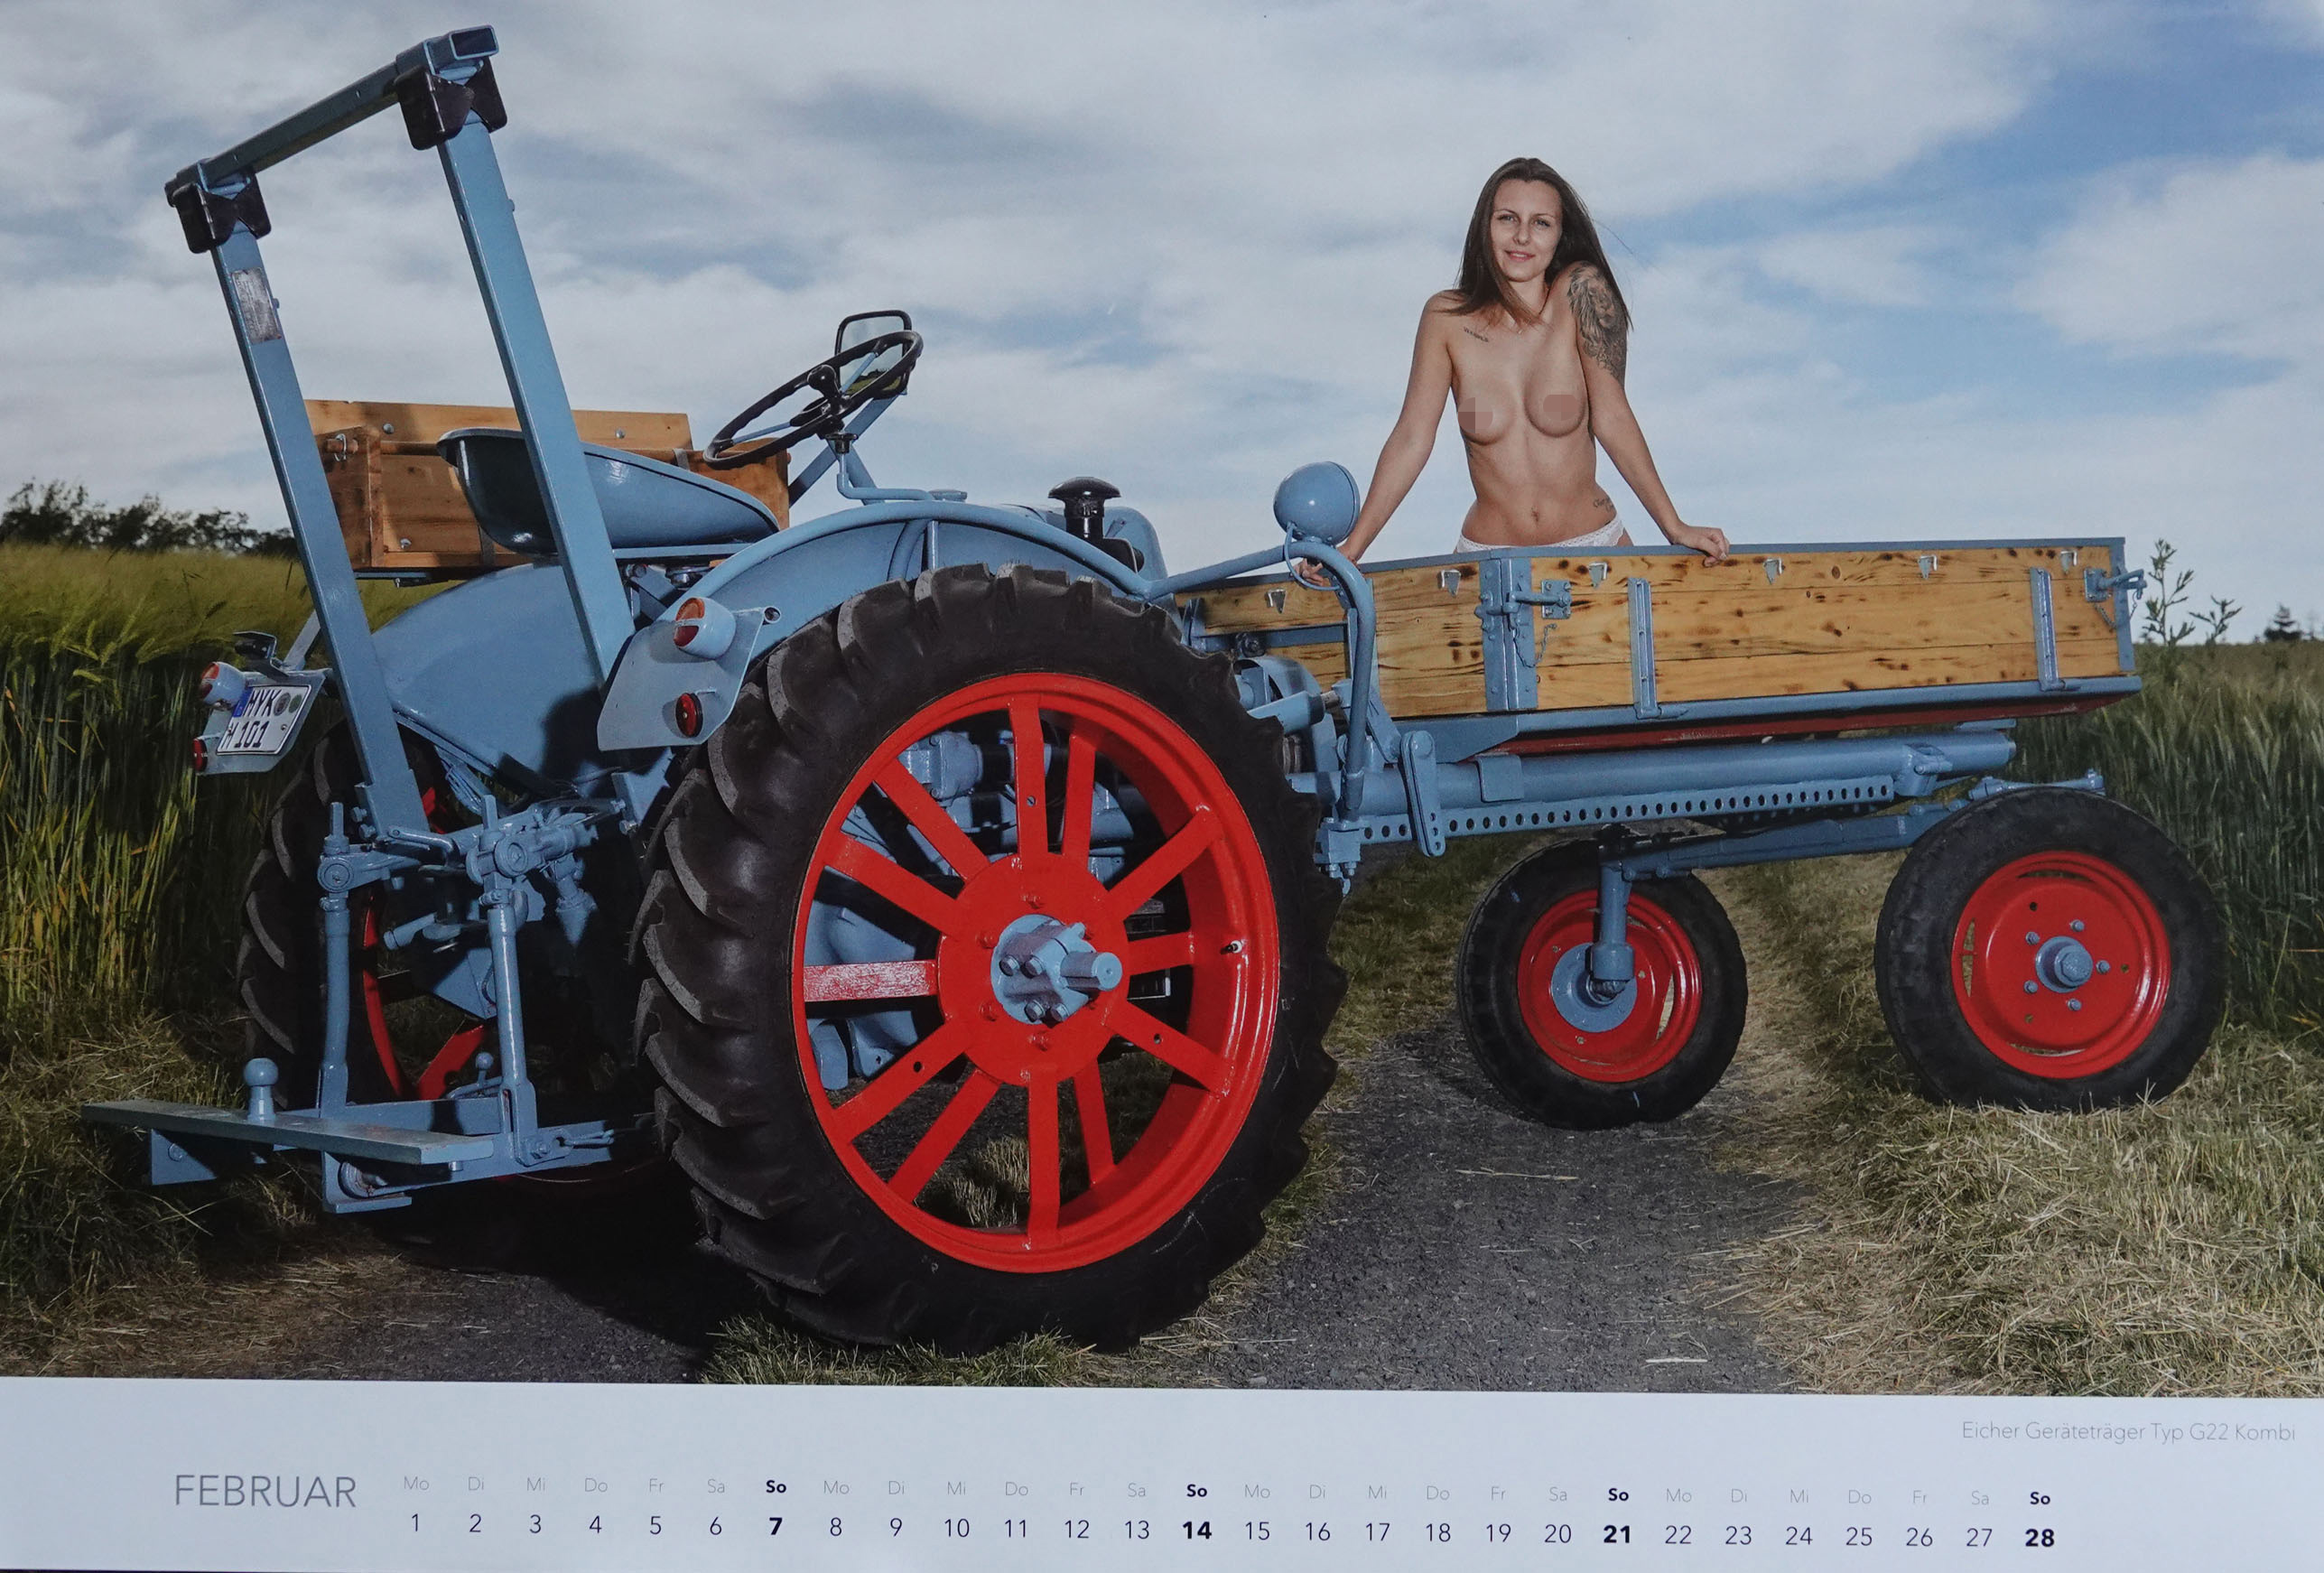 amy bibby recommends Topless On The Farm